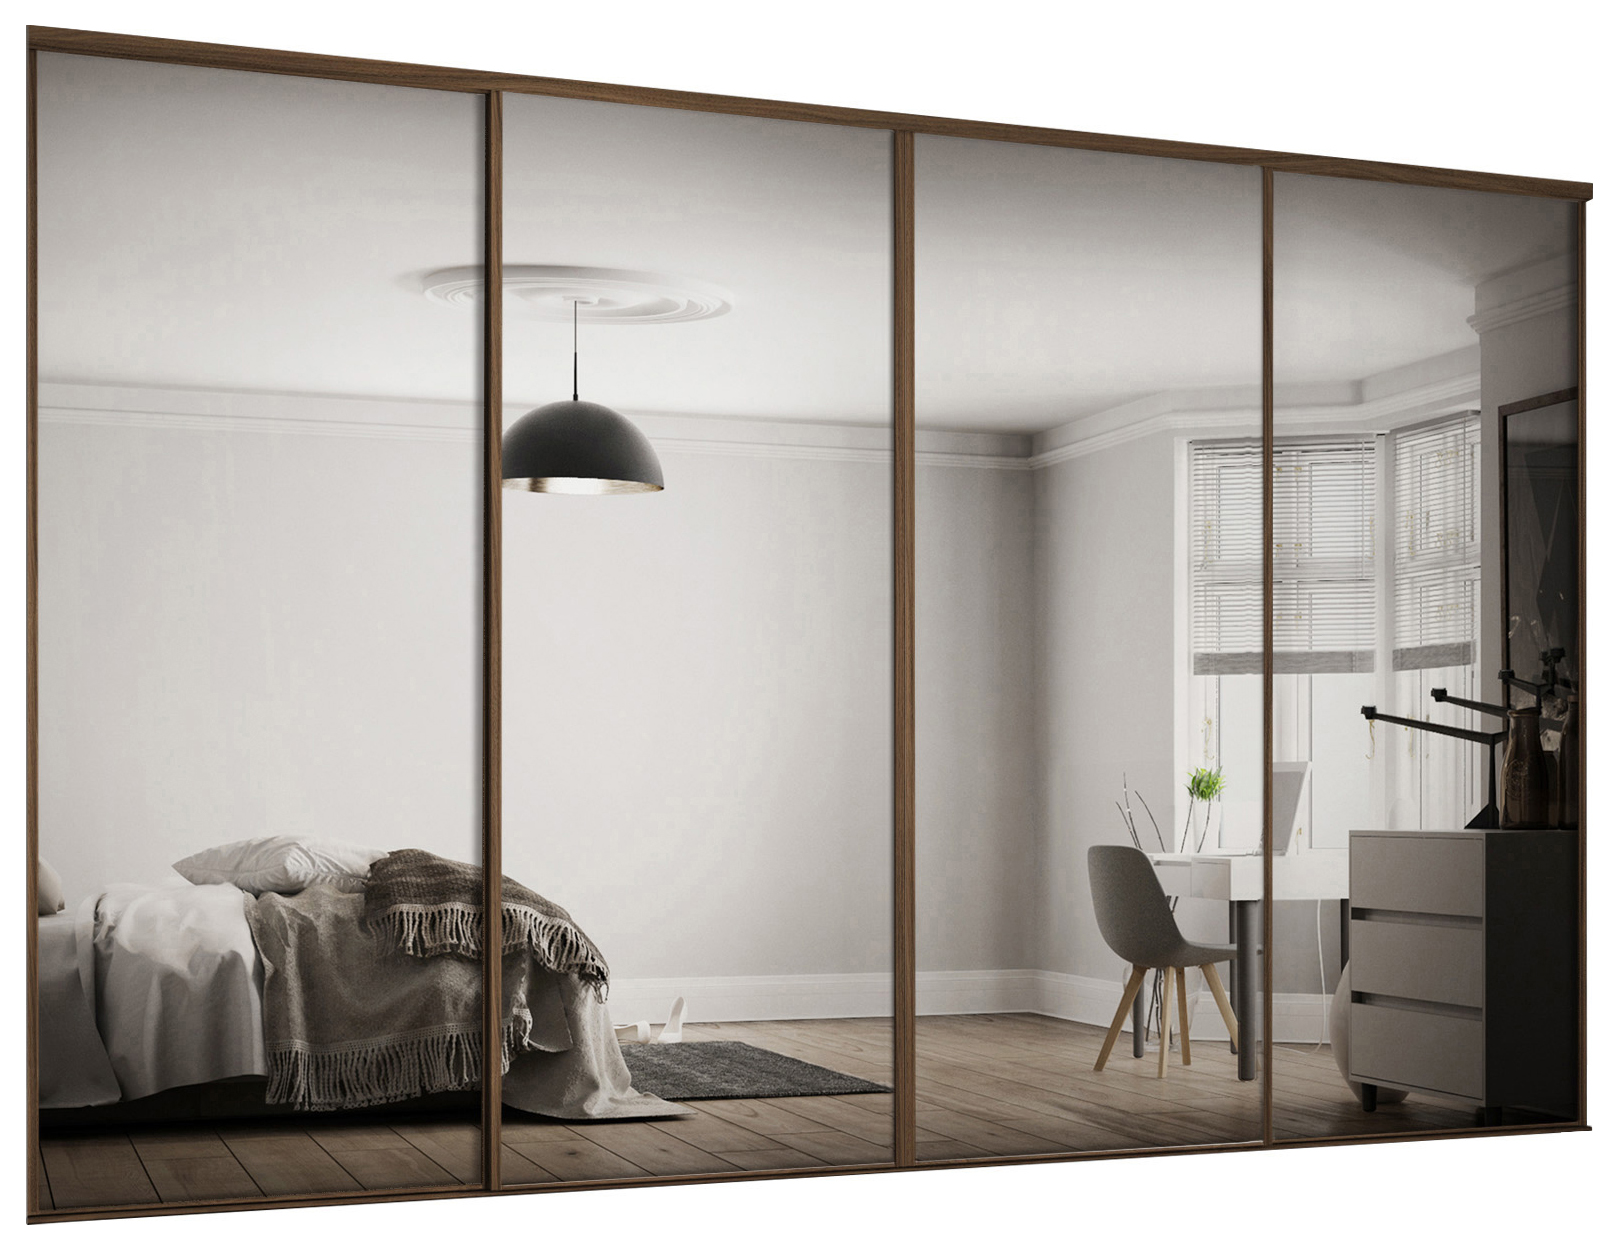 Image of Spacepro Heritage Carini Walnut Frame Mirror Sliding Door Kit with Colour Matched Track - 4 x 914mm